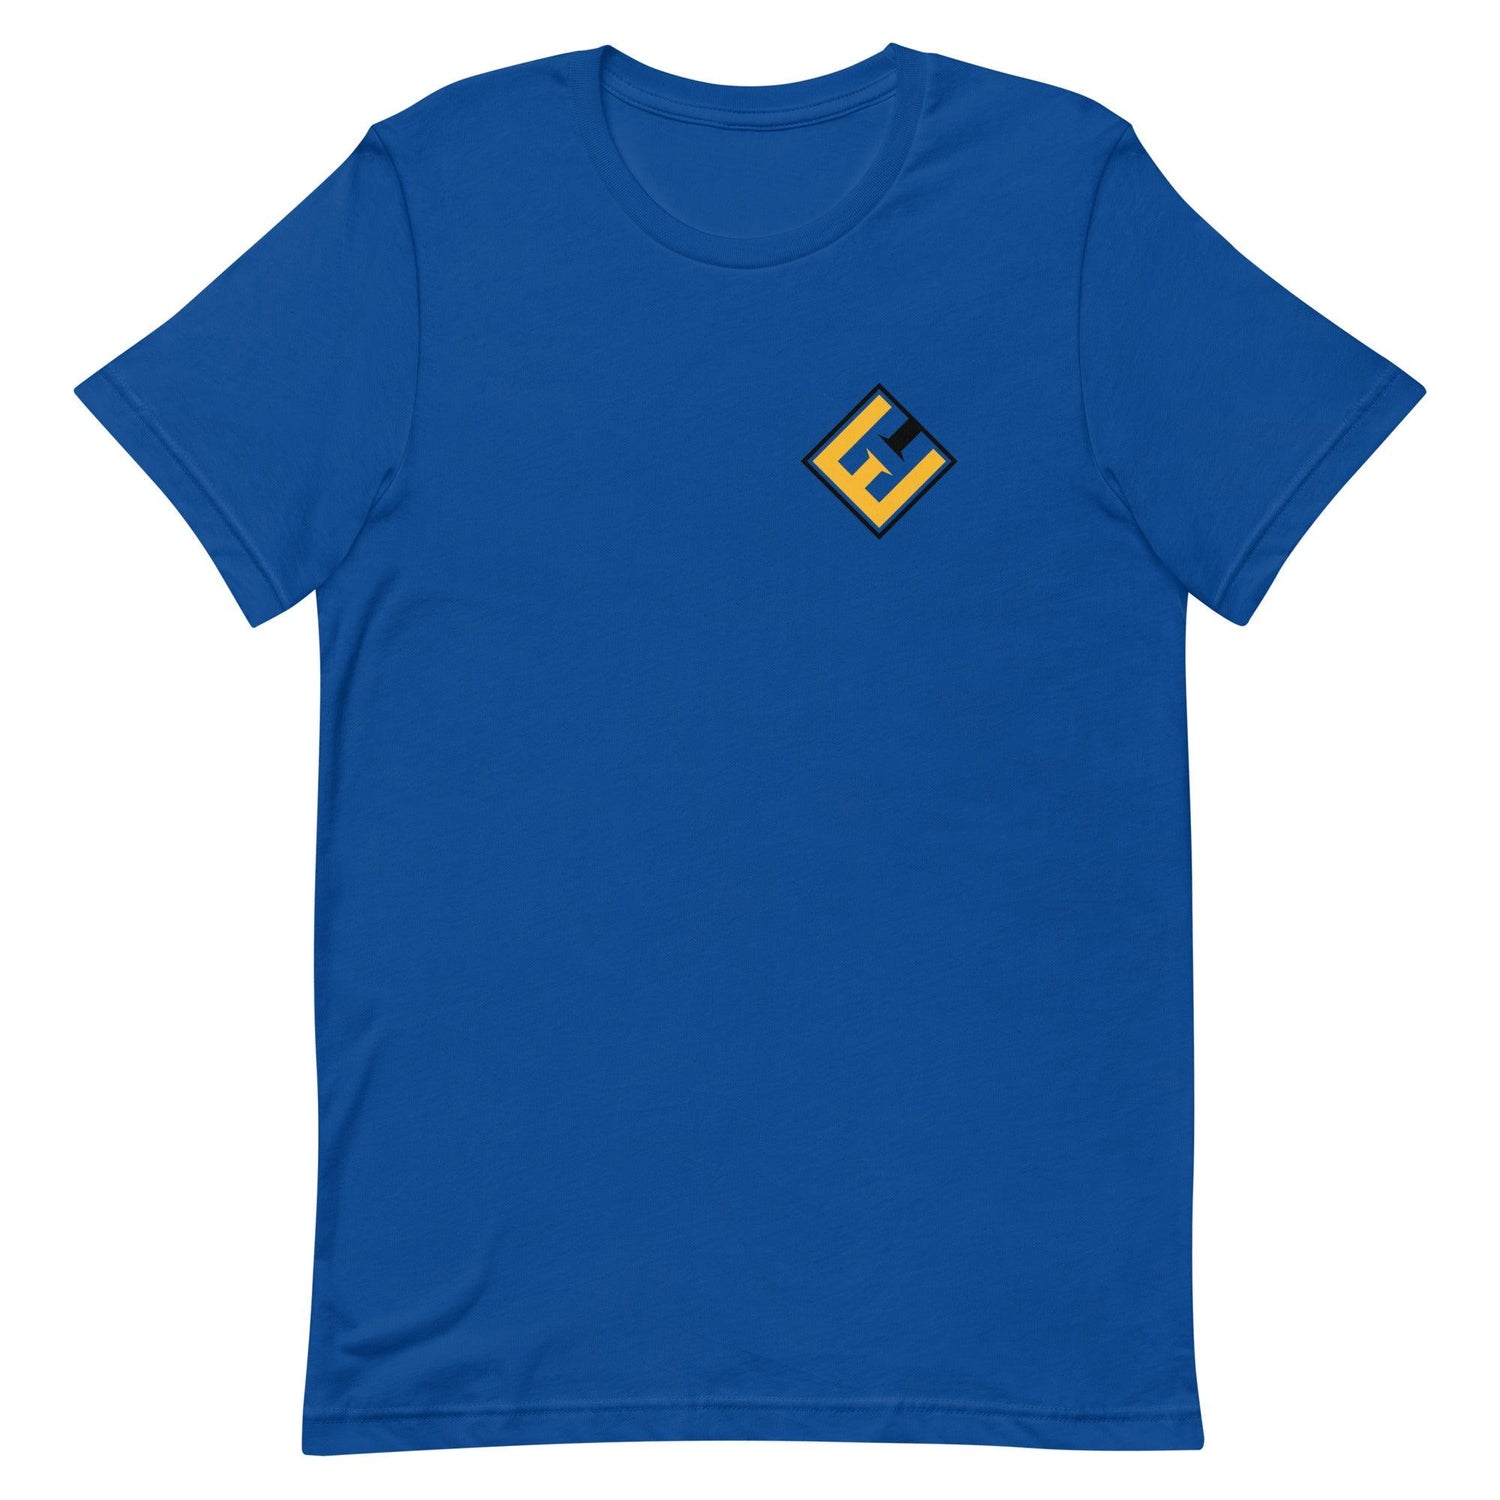 Eric Hanhold “EH” t-shirt - Fan Arch